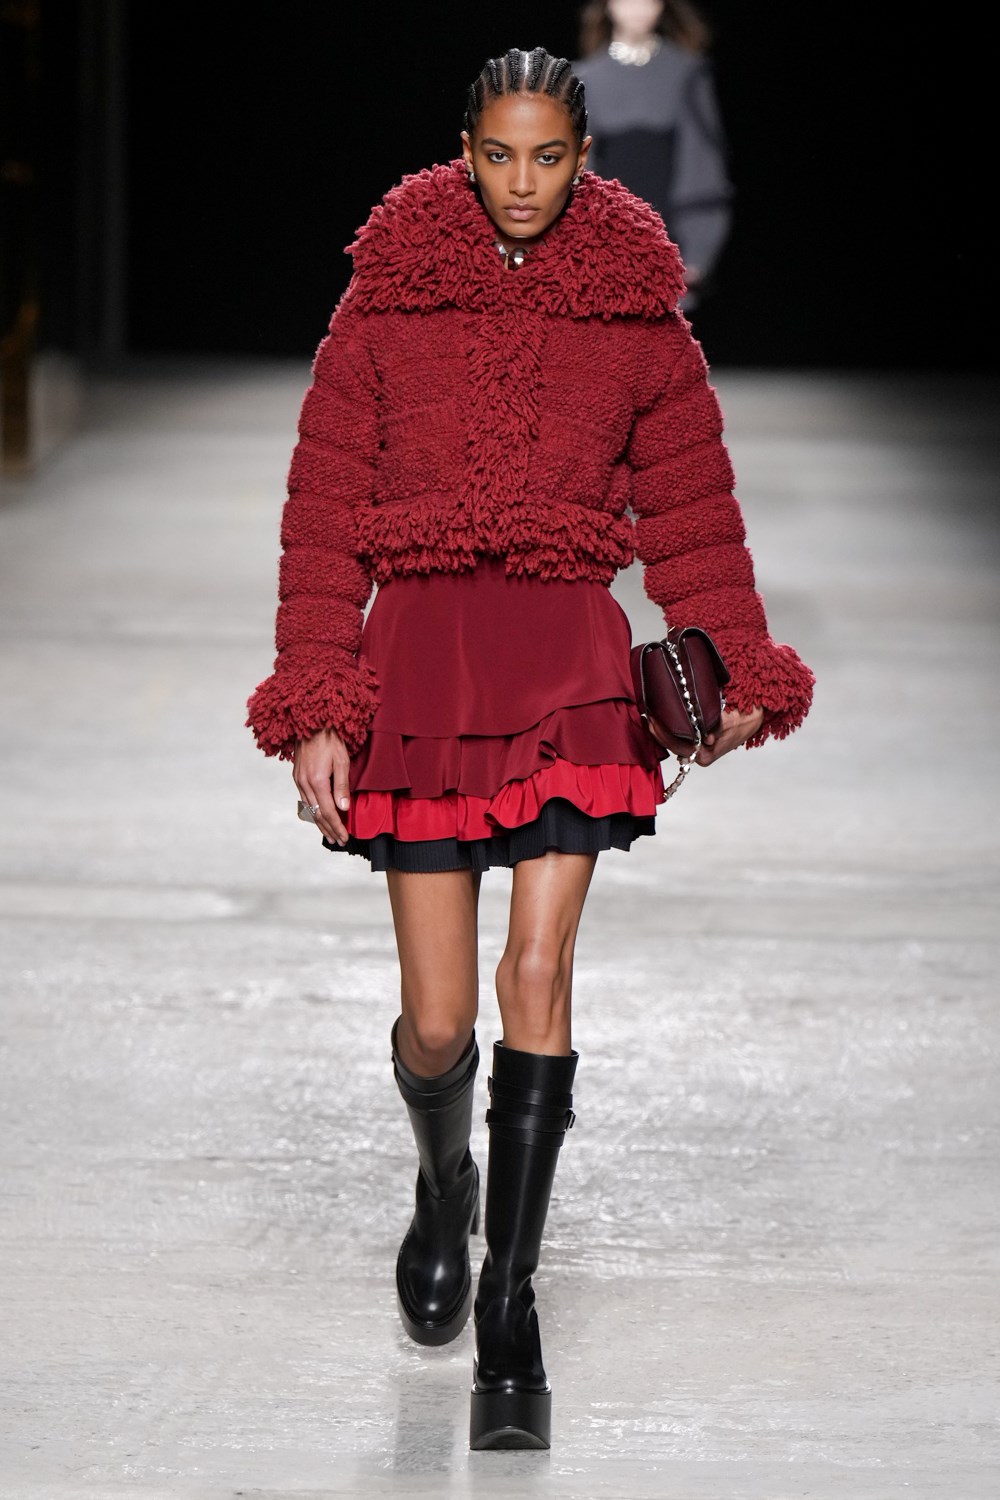 Review of Ports 1961 Fall 2022 Fashion Show